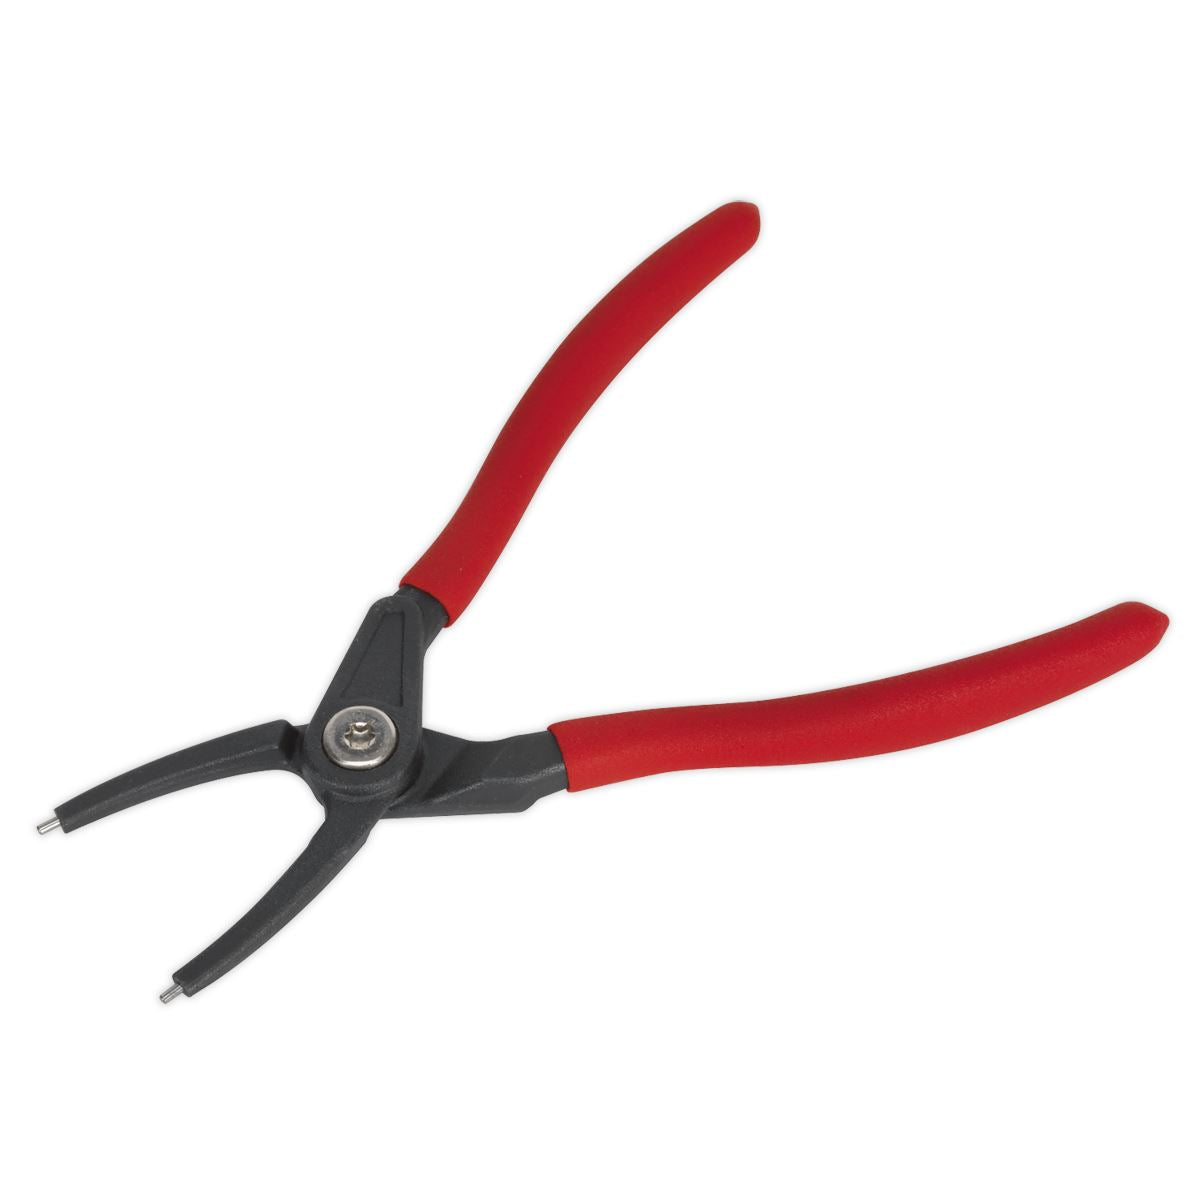 Sealey Premier Circlip Pliers Internal Straight Nose 170mm